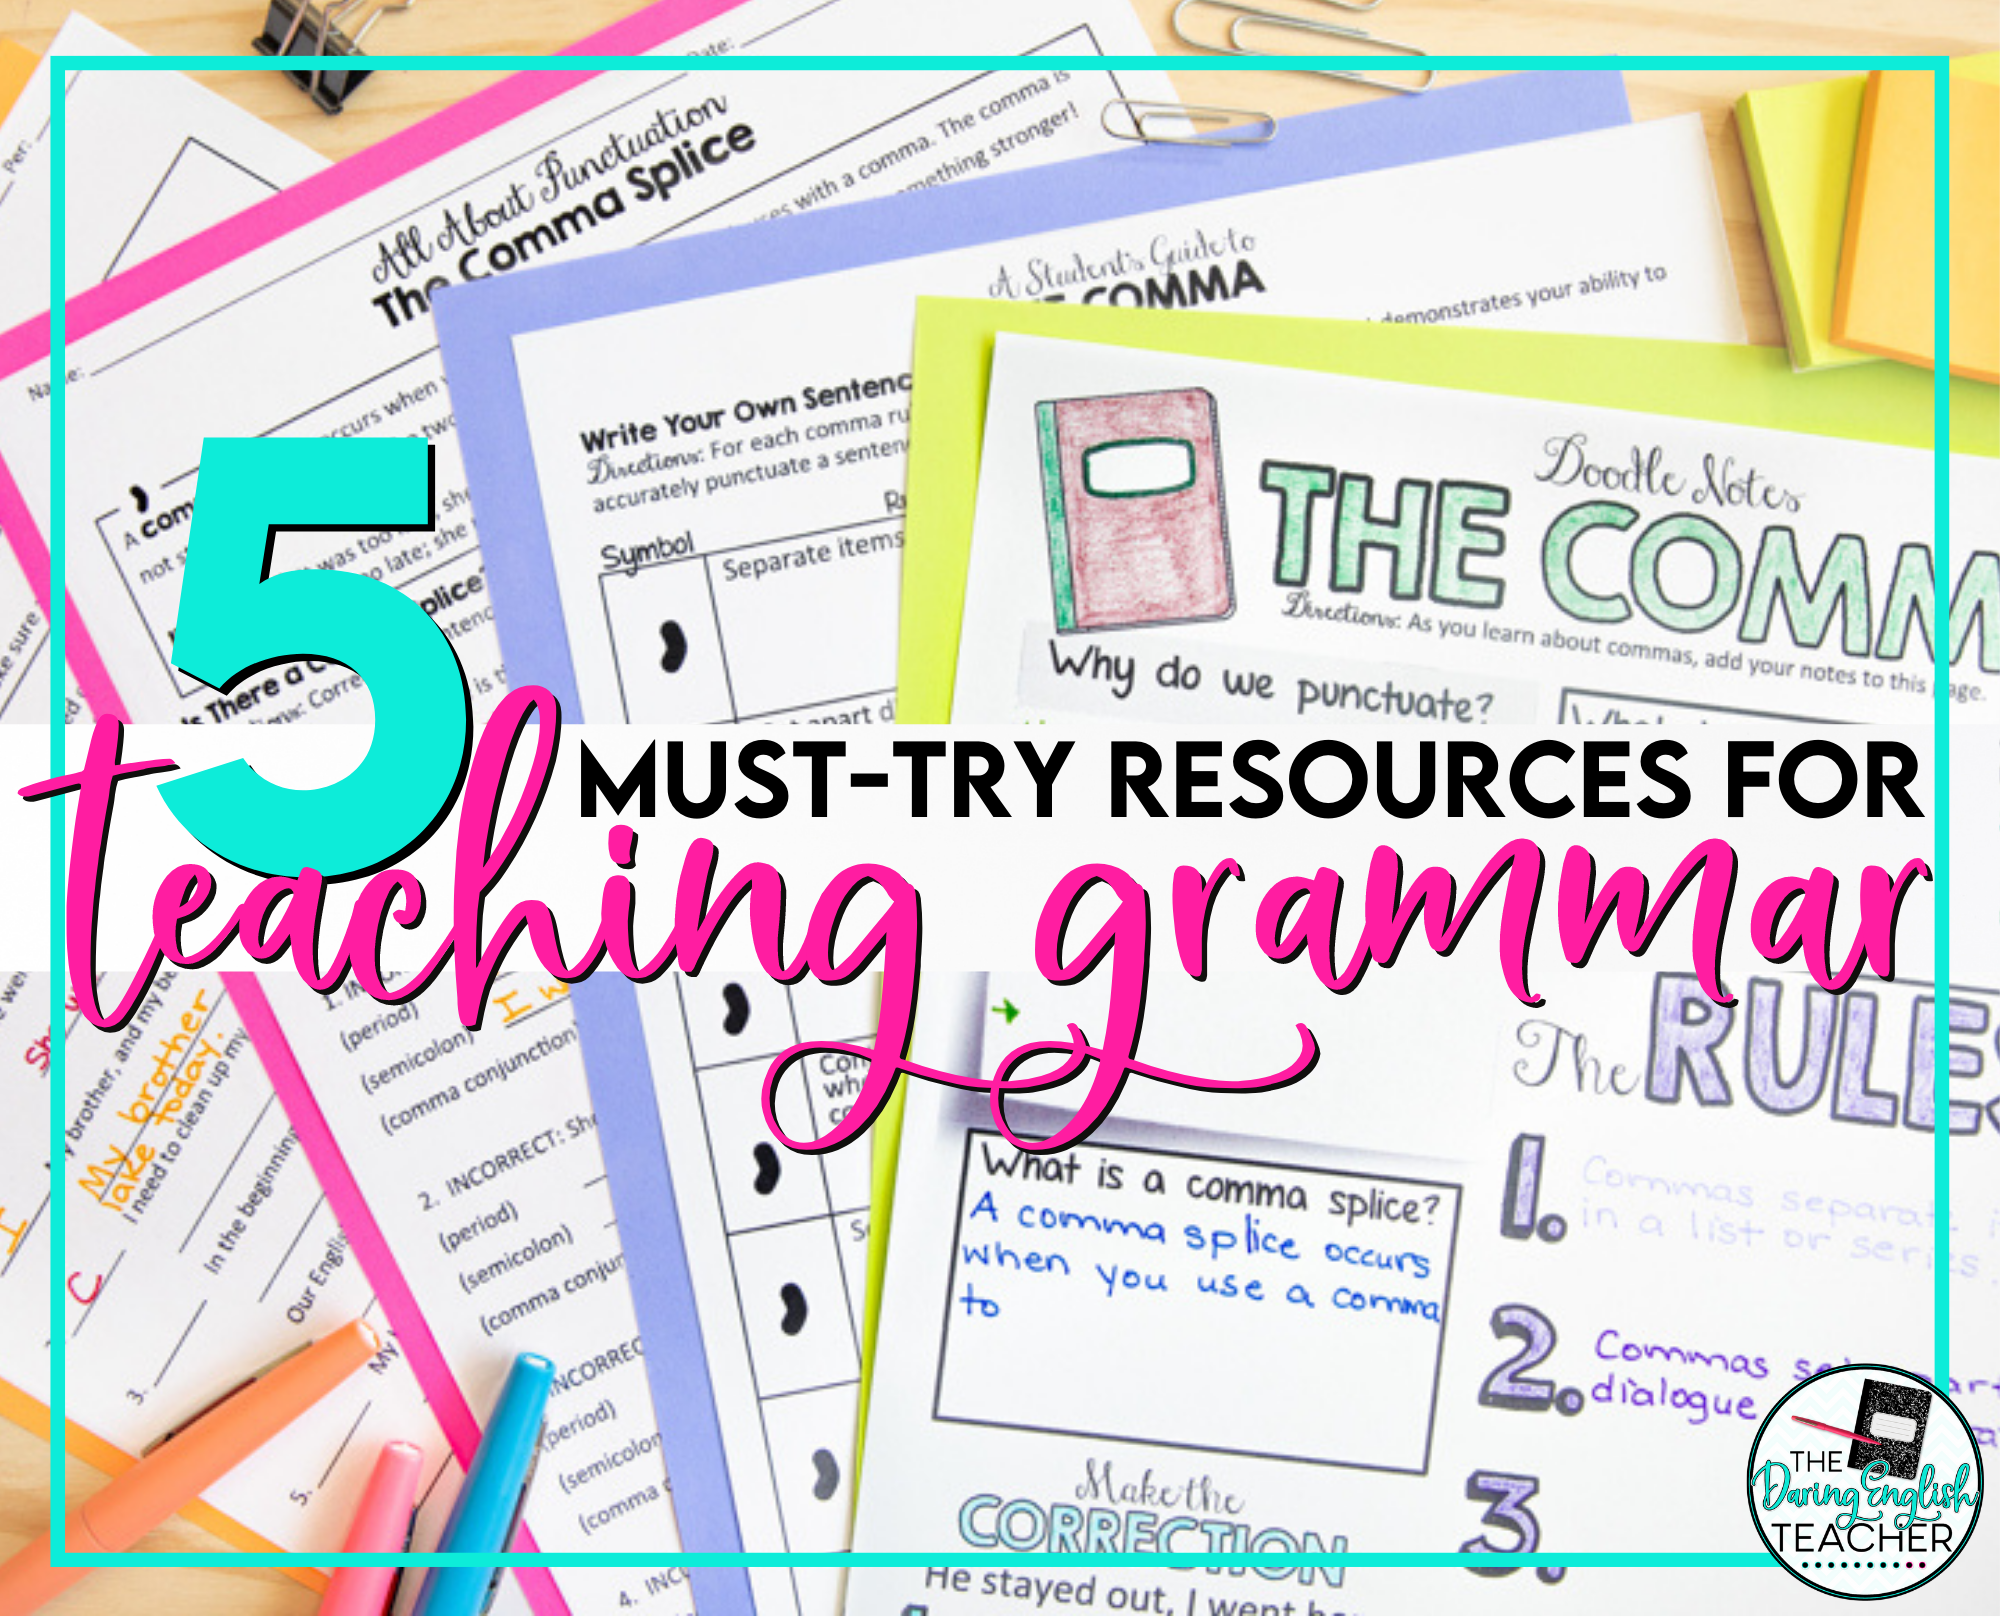 5 Must-Try Resources to Improve Student Grammar